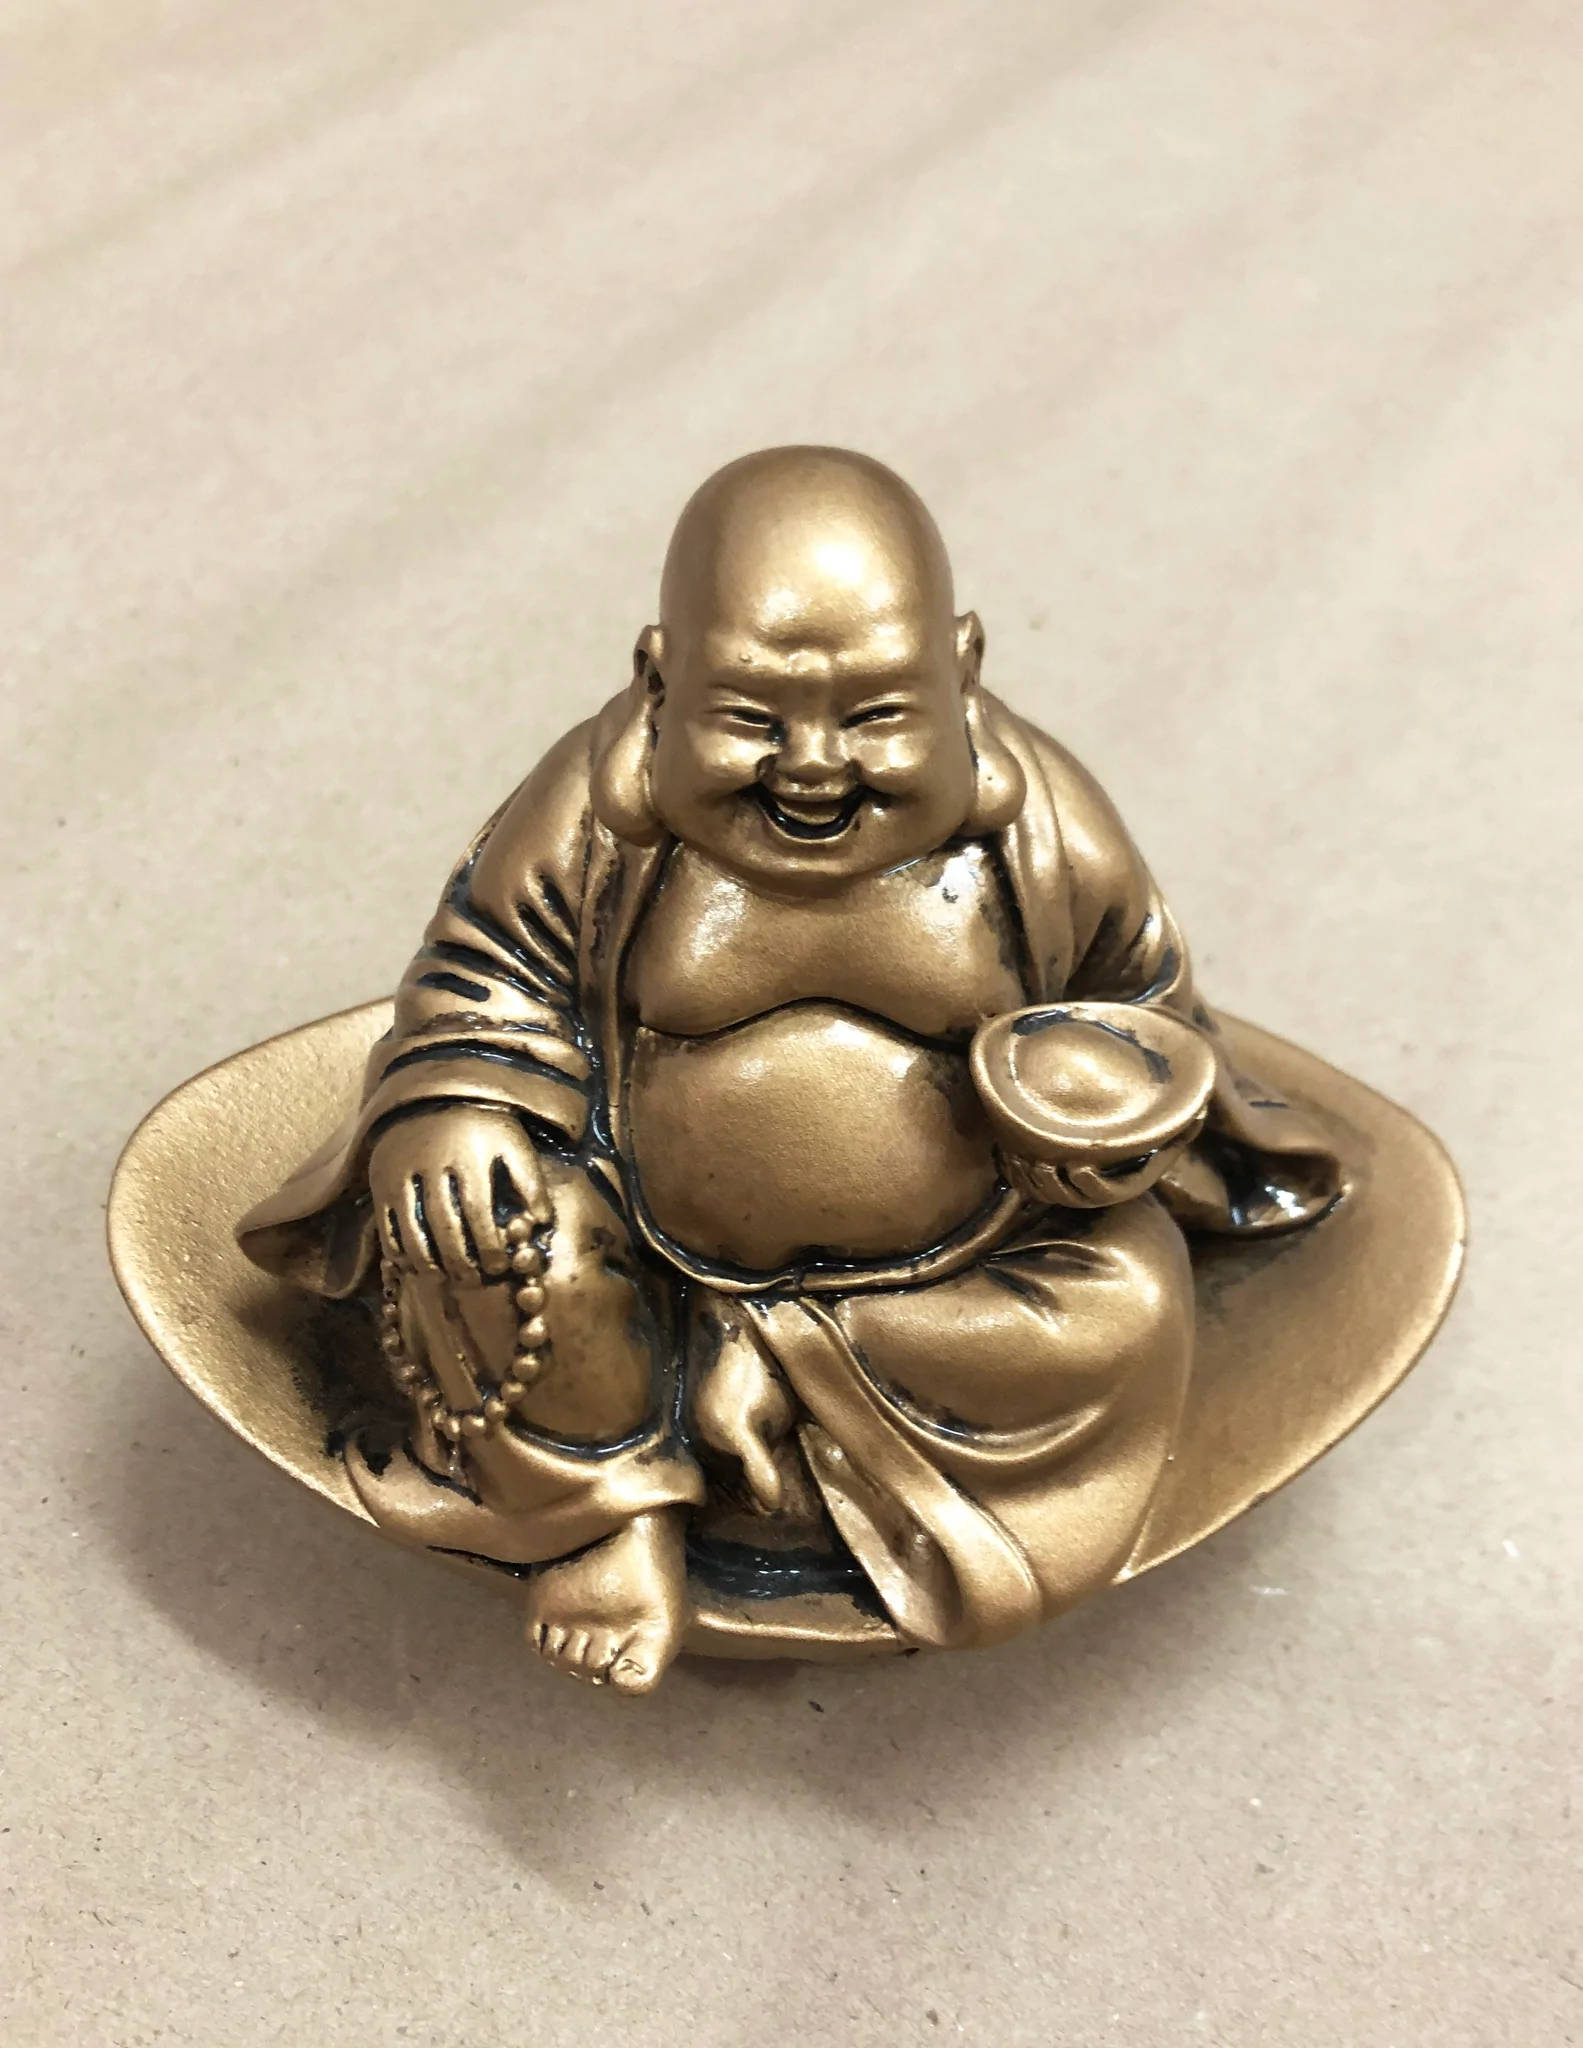 Download Small Laughing Buddha Statue Wallpaper | Wallpapers.com